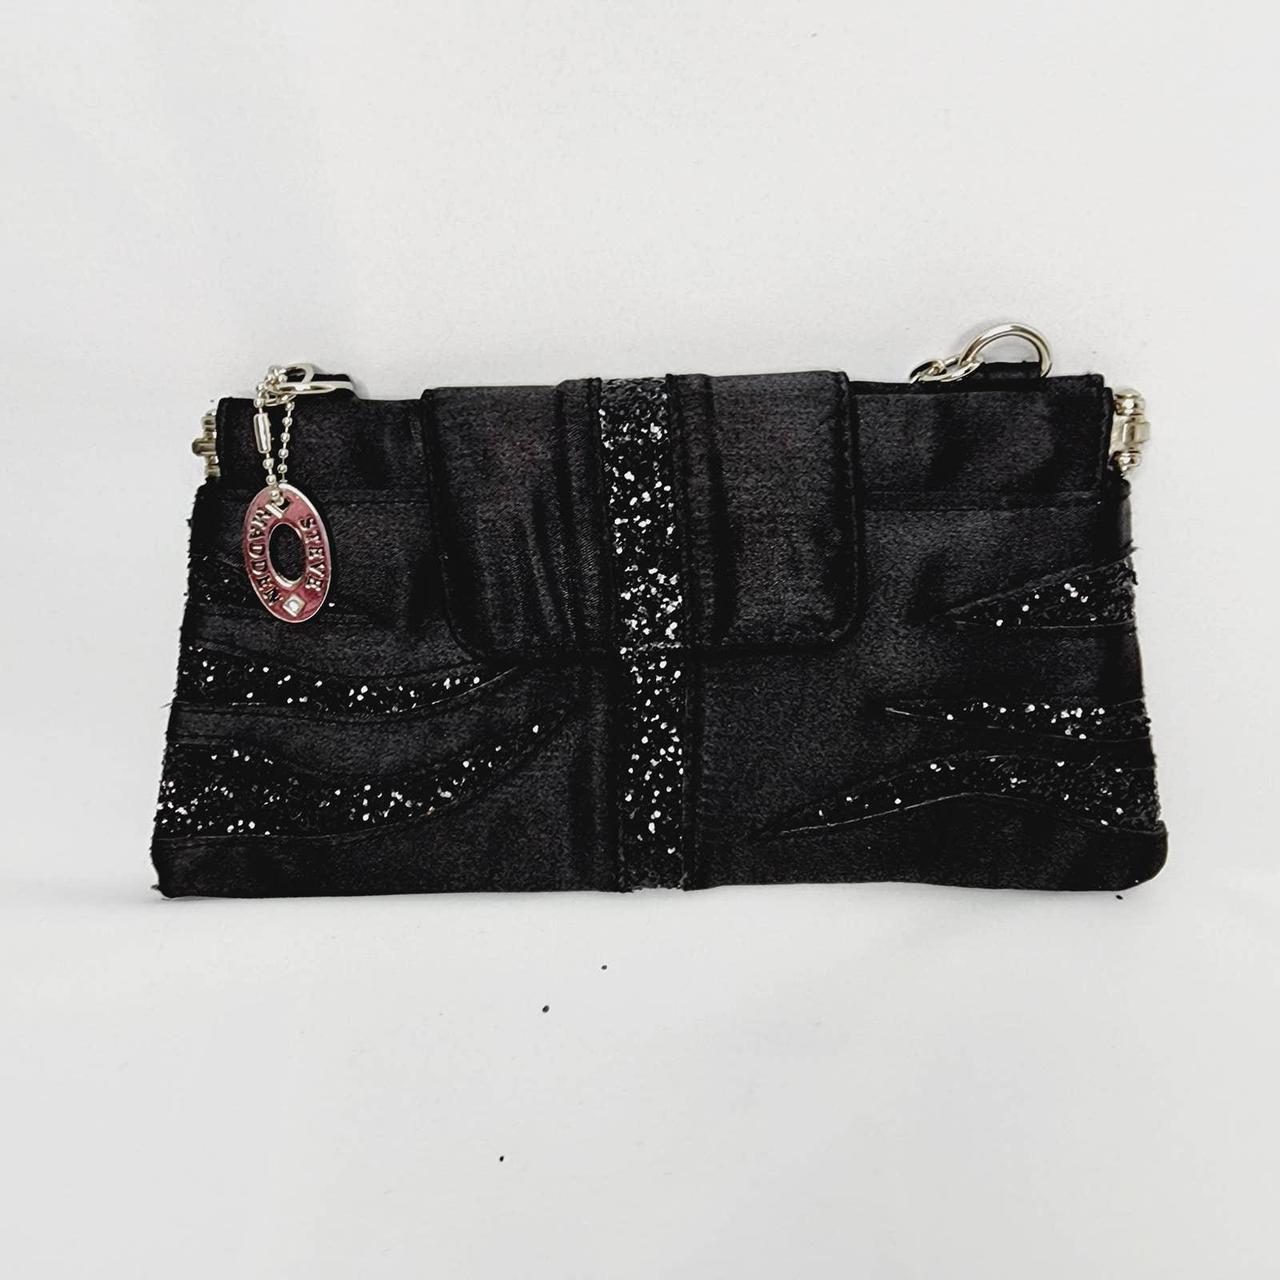 Buy Retro Black Satin Evening Bag Small Clutch Purse Online in India - Etsy